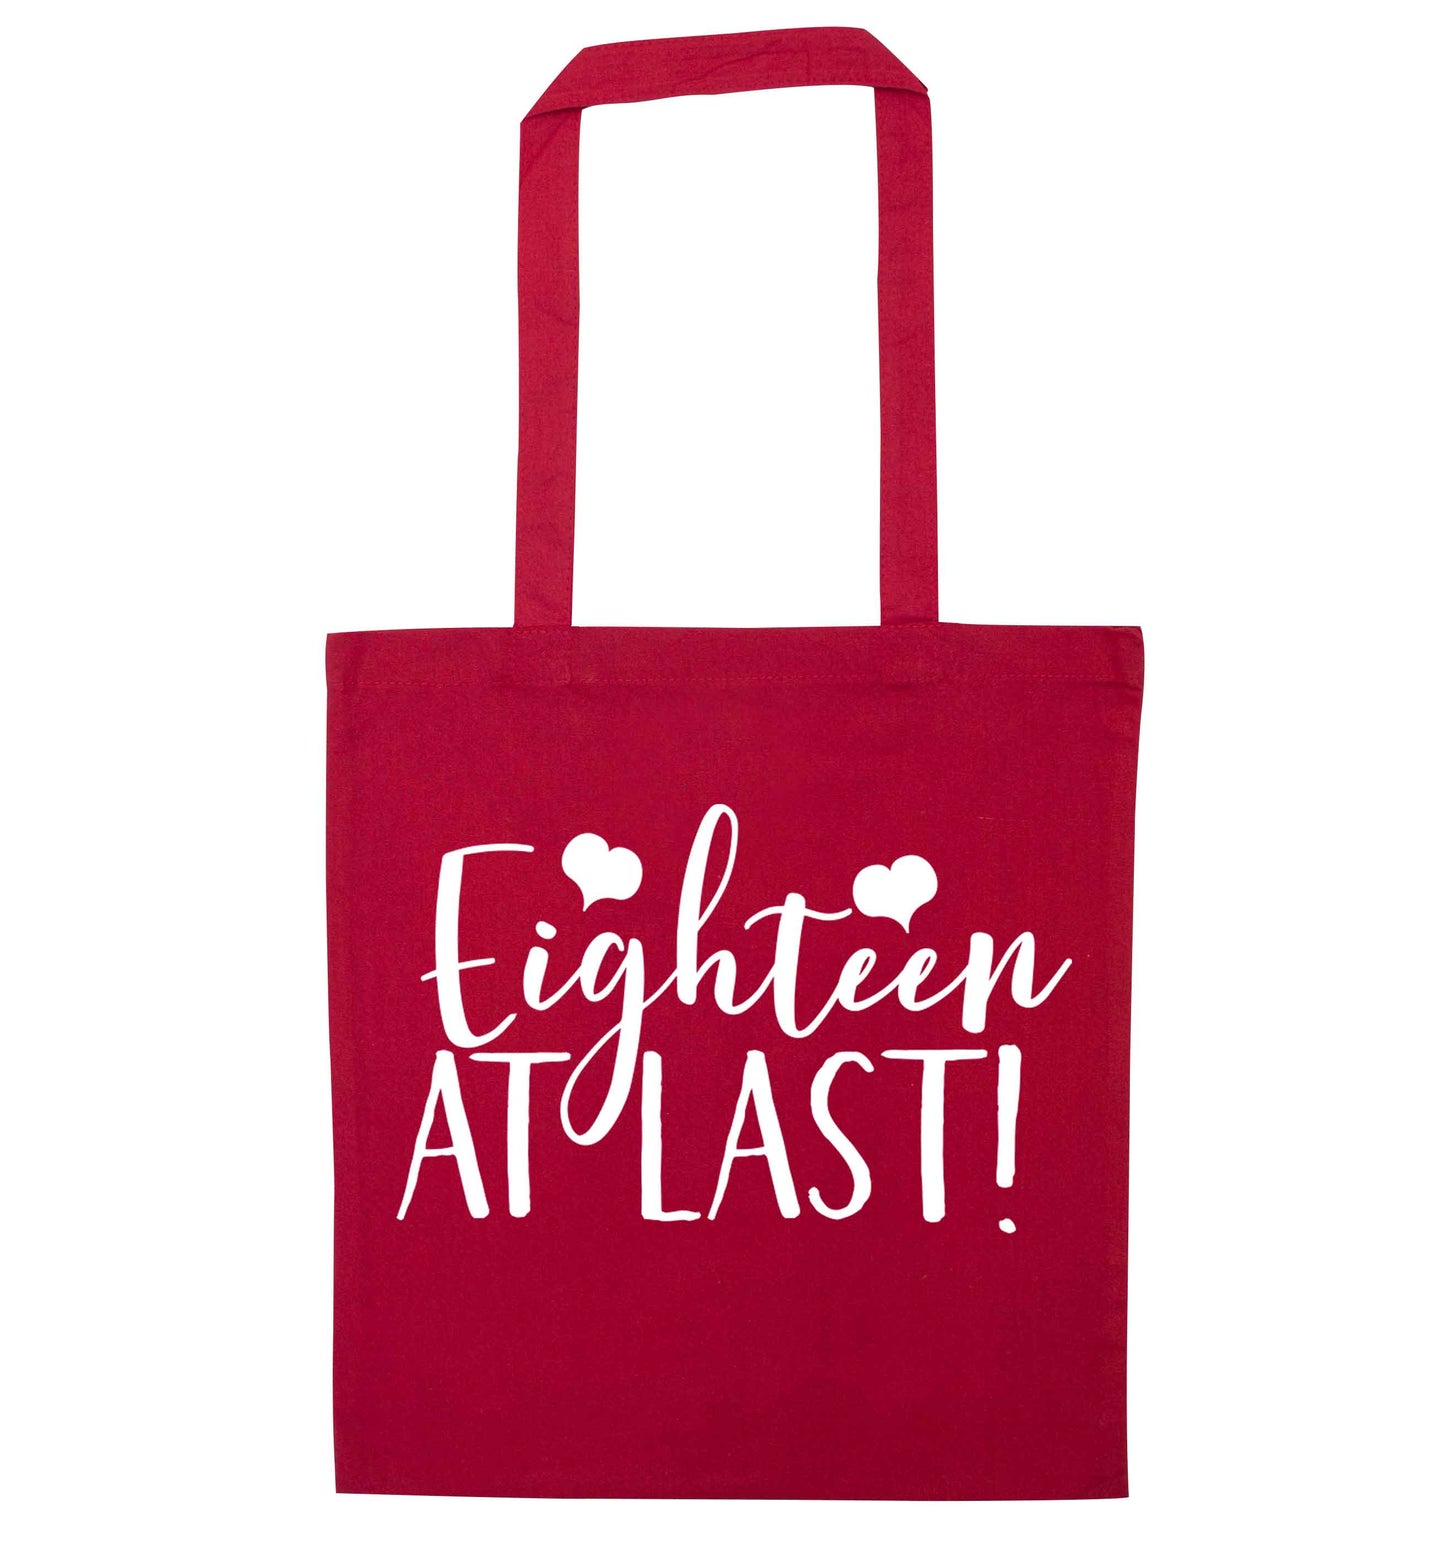 Eighteen at last!red tote bag